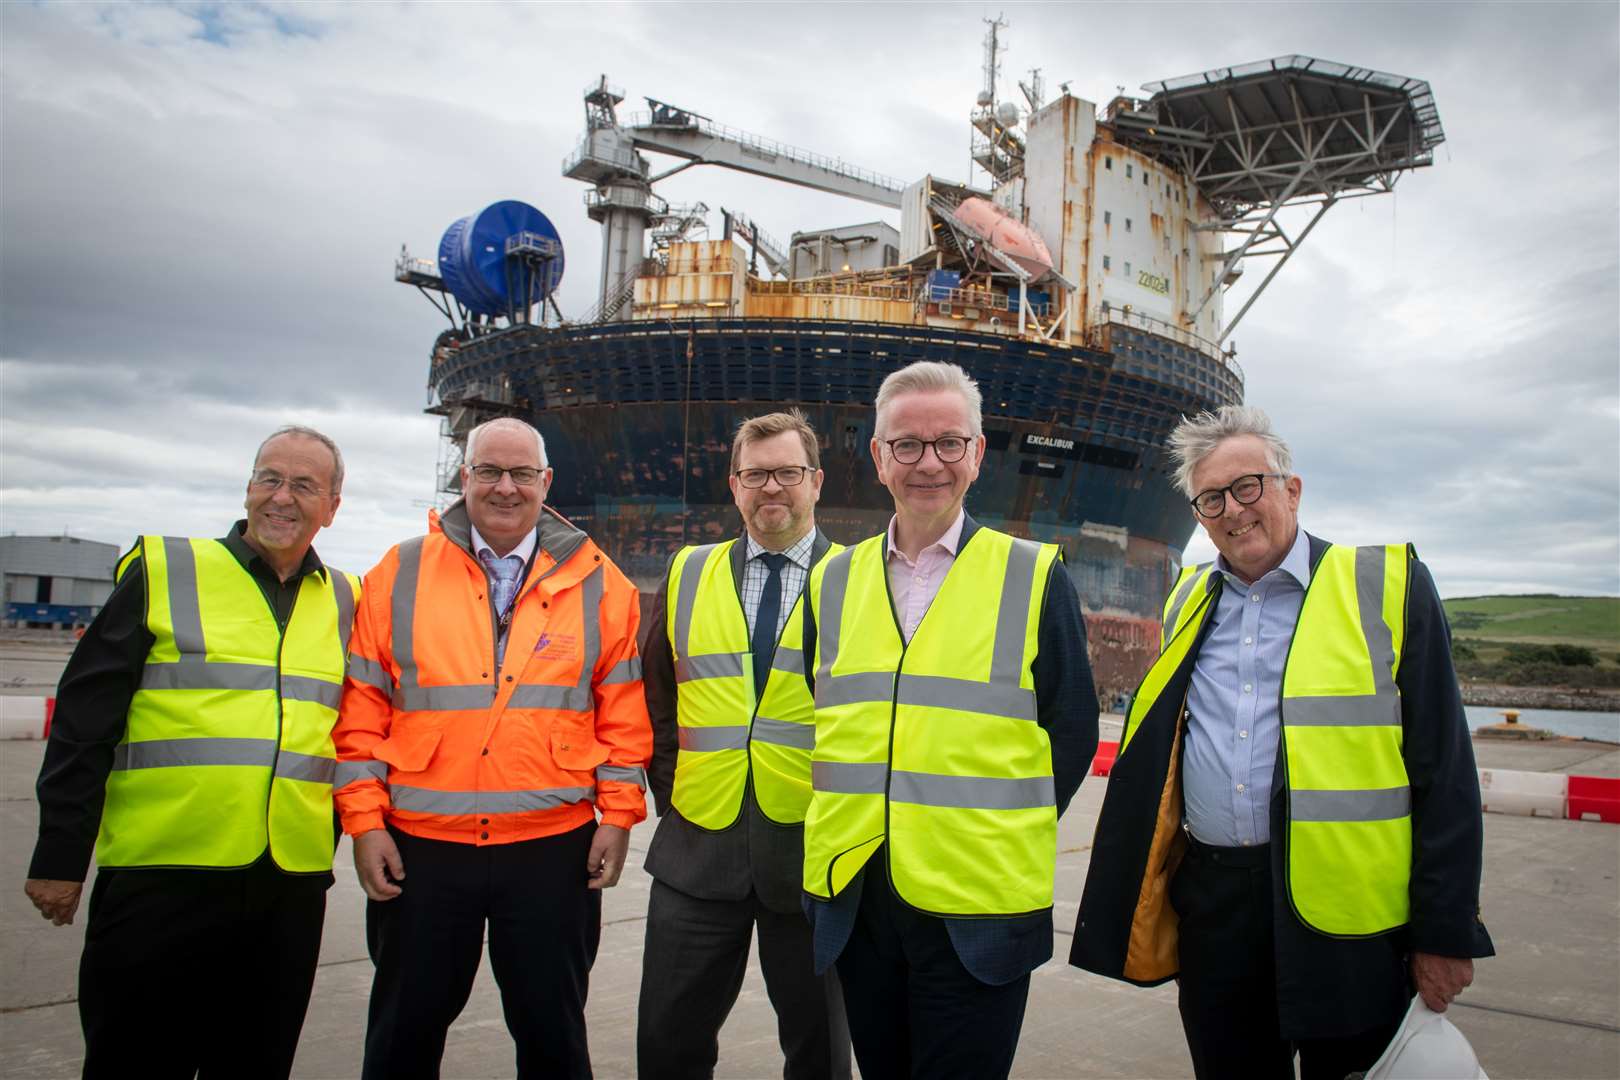 Roy MacGregor Global Energy, Councillor Raymond Bremner, Calum MacPherson CEO of Inverness and Cromarty Firth Green Freeport, The Rt Hon Michael Gove MP and Jamie Stone MP. Picture: Callum Mackay..